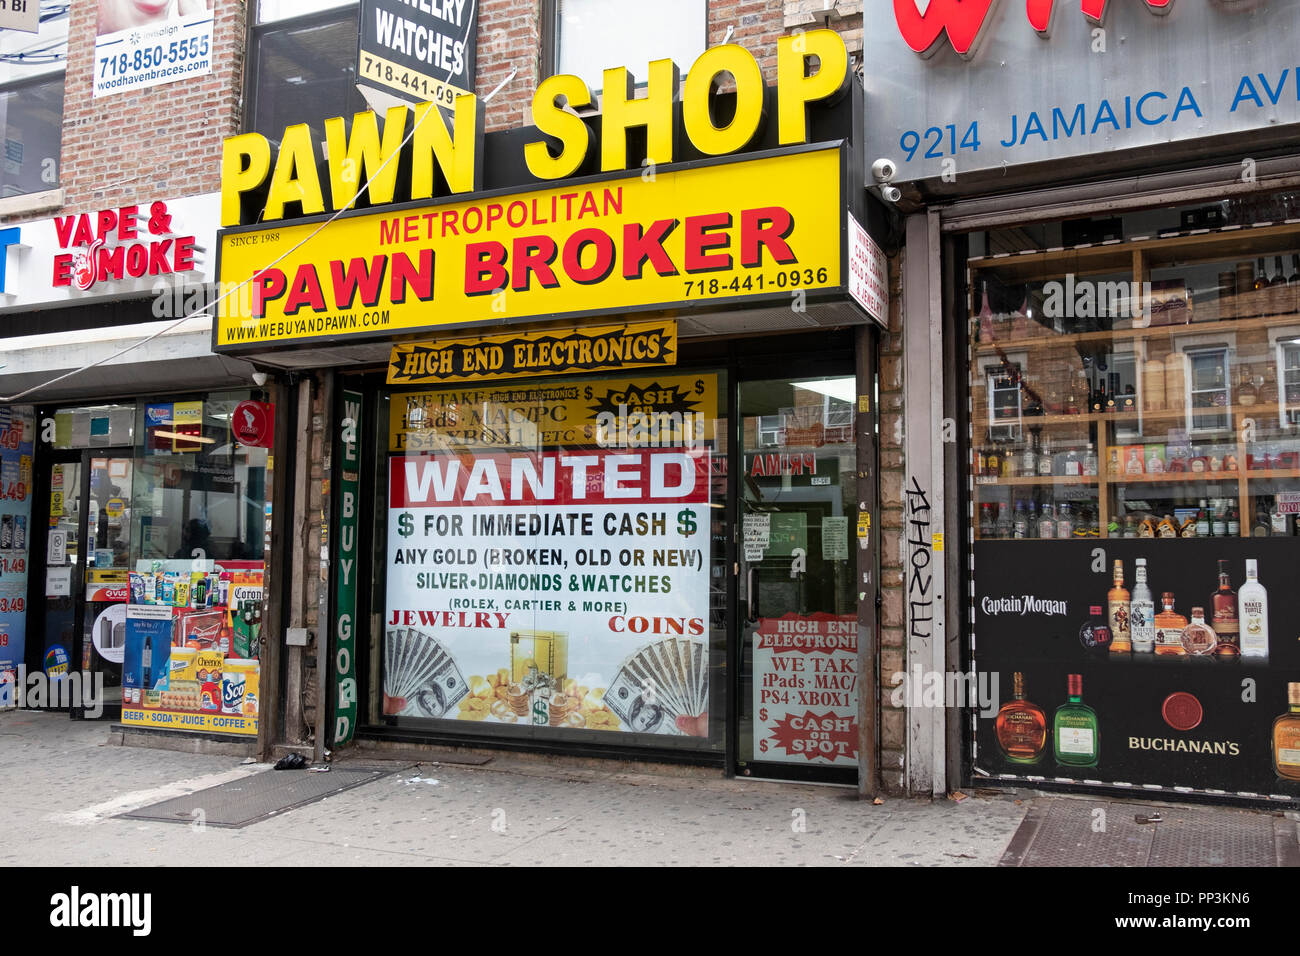 The exterior of and entrance to the METROPOLITAN PAWN BROKER pawn shop on Jamaica Avenue in the Woodhaven section of Queens, New York Stock Photo